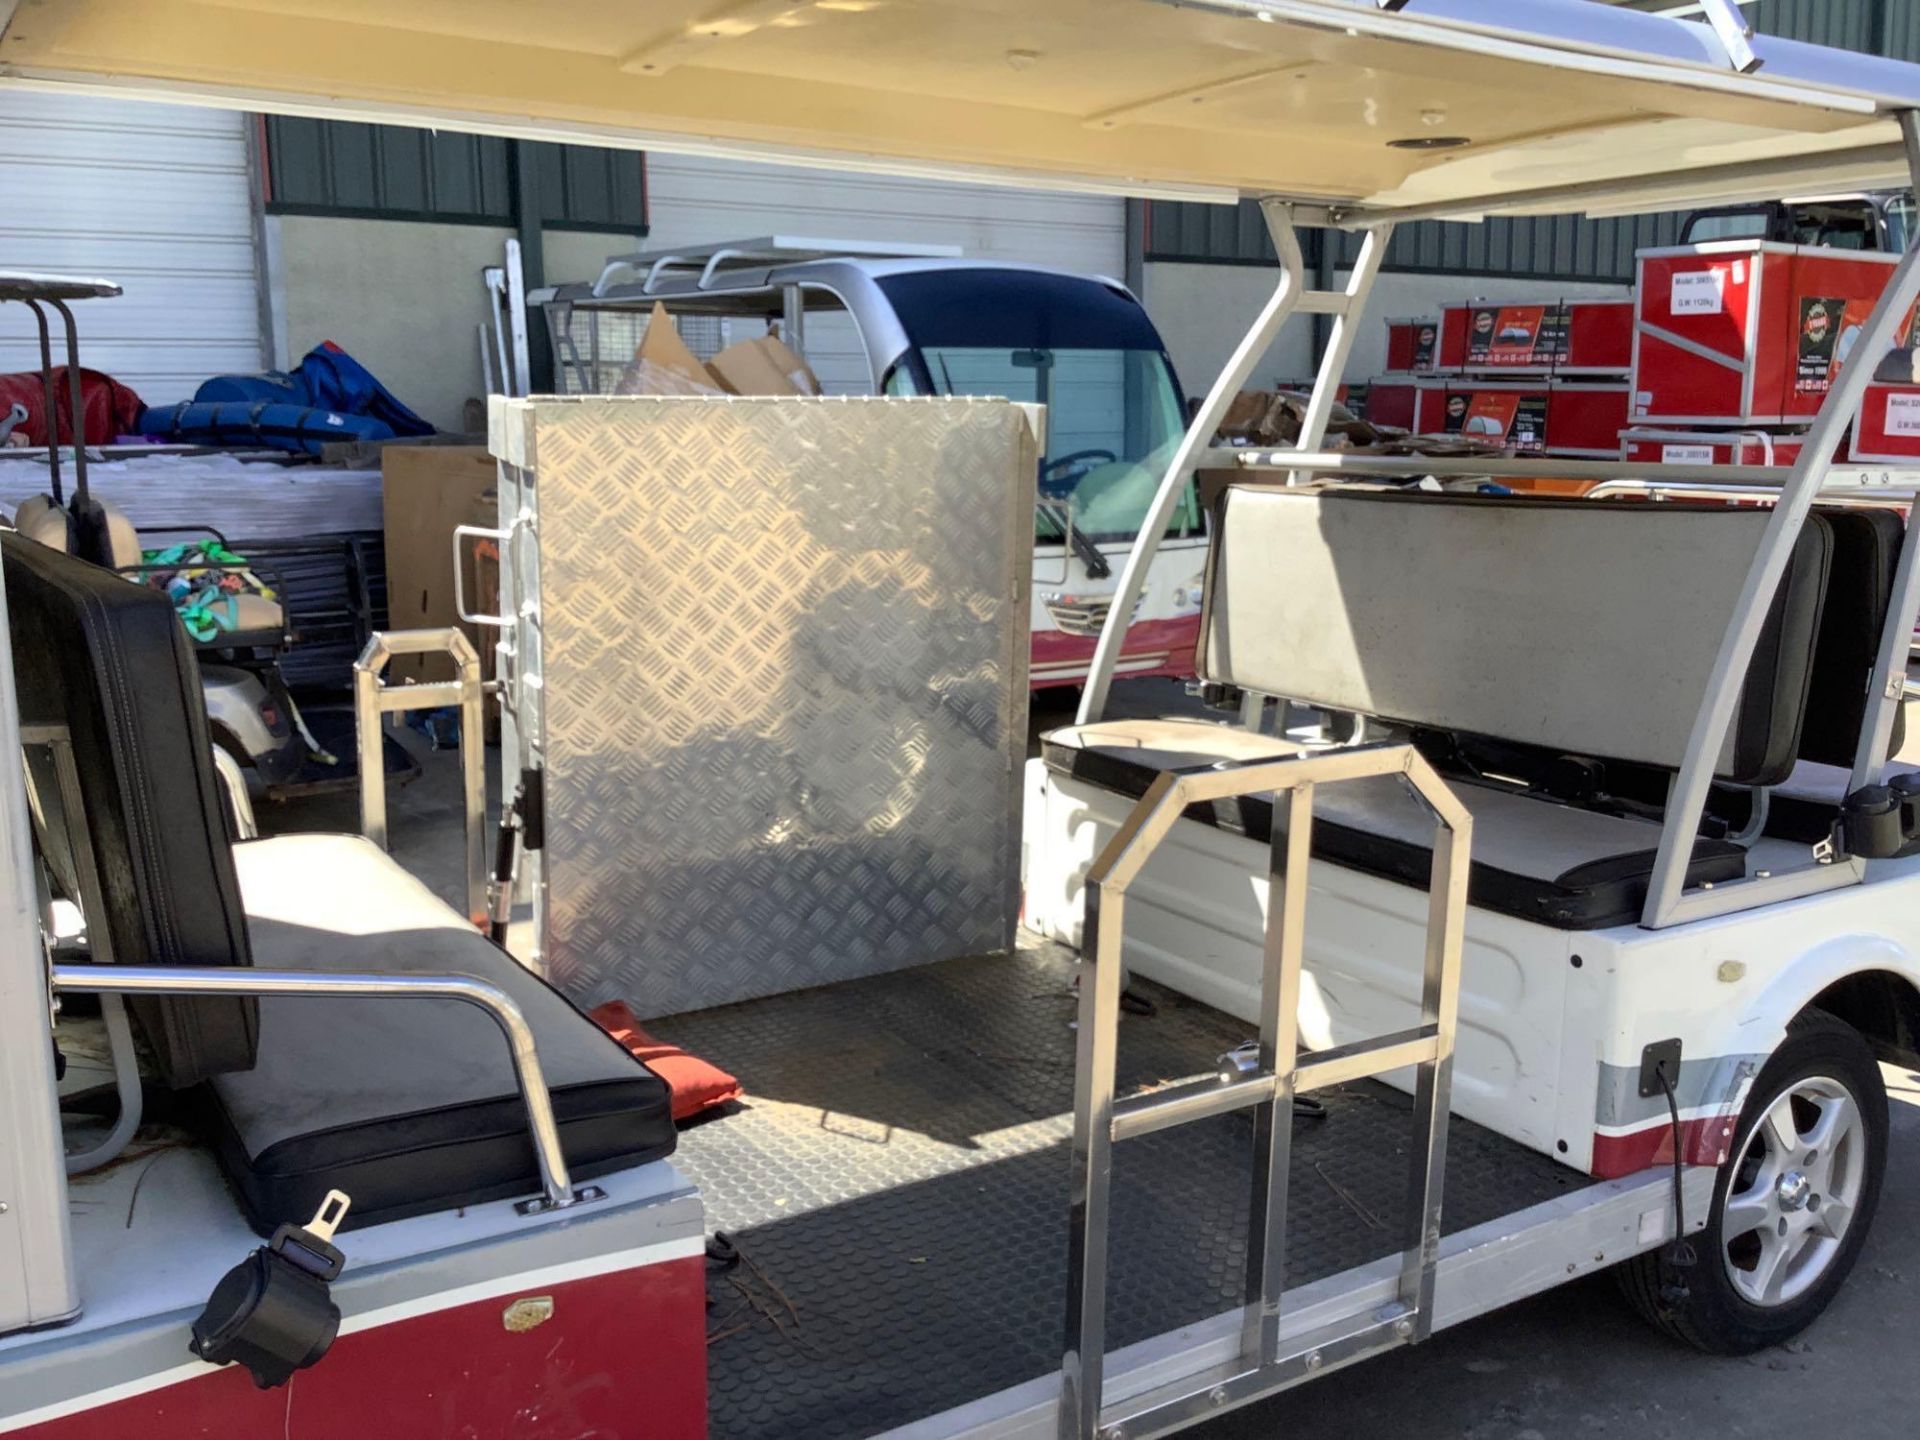 2015 STAR EV SHUTTLE CART MODEL STAR-BN72-11-AC-WHEELCHAIR, ELECTRIC, SOLA PANEL ATTACHED, DOME LIGH - Image 16 of 40